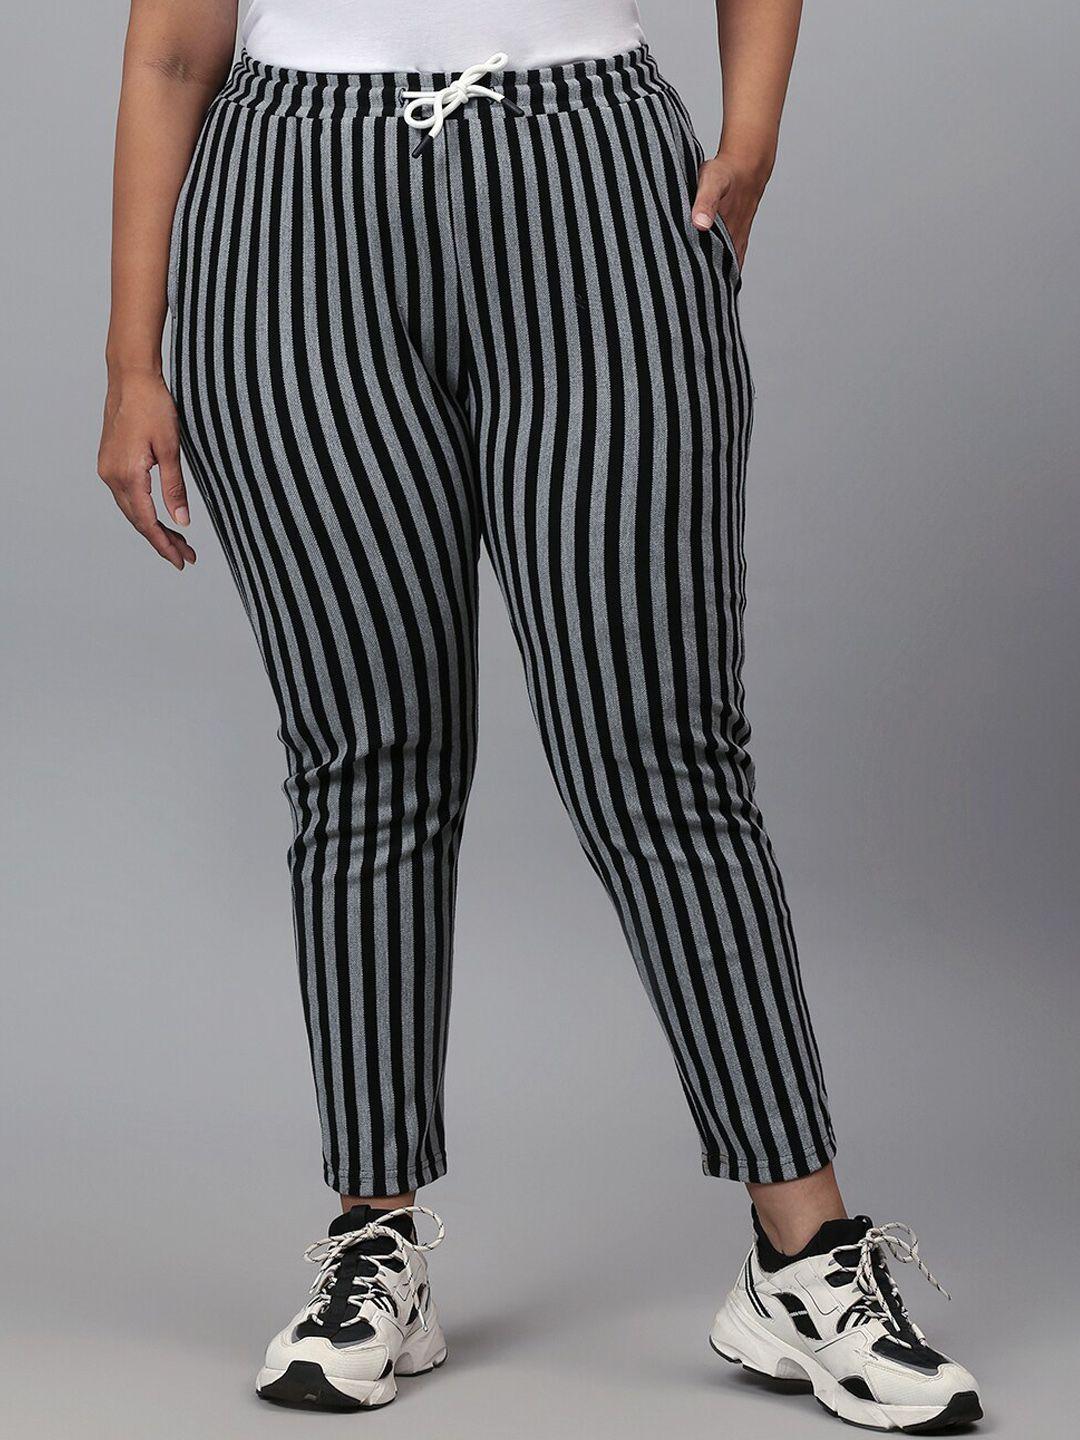 instafab-plus-women-grey-&-black-striped-relaxed-fit-cotton-track-pants